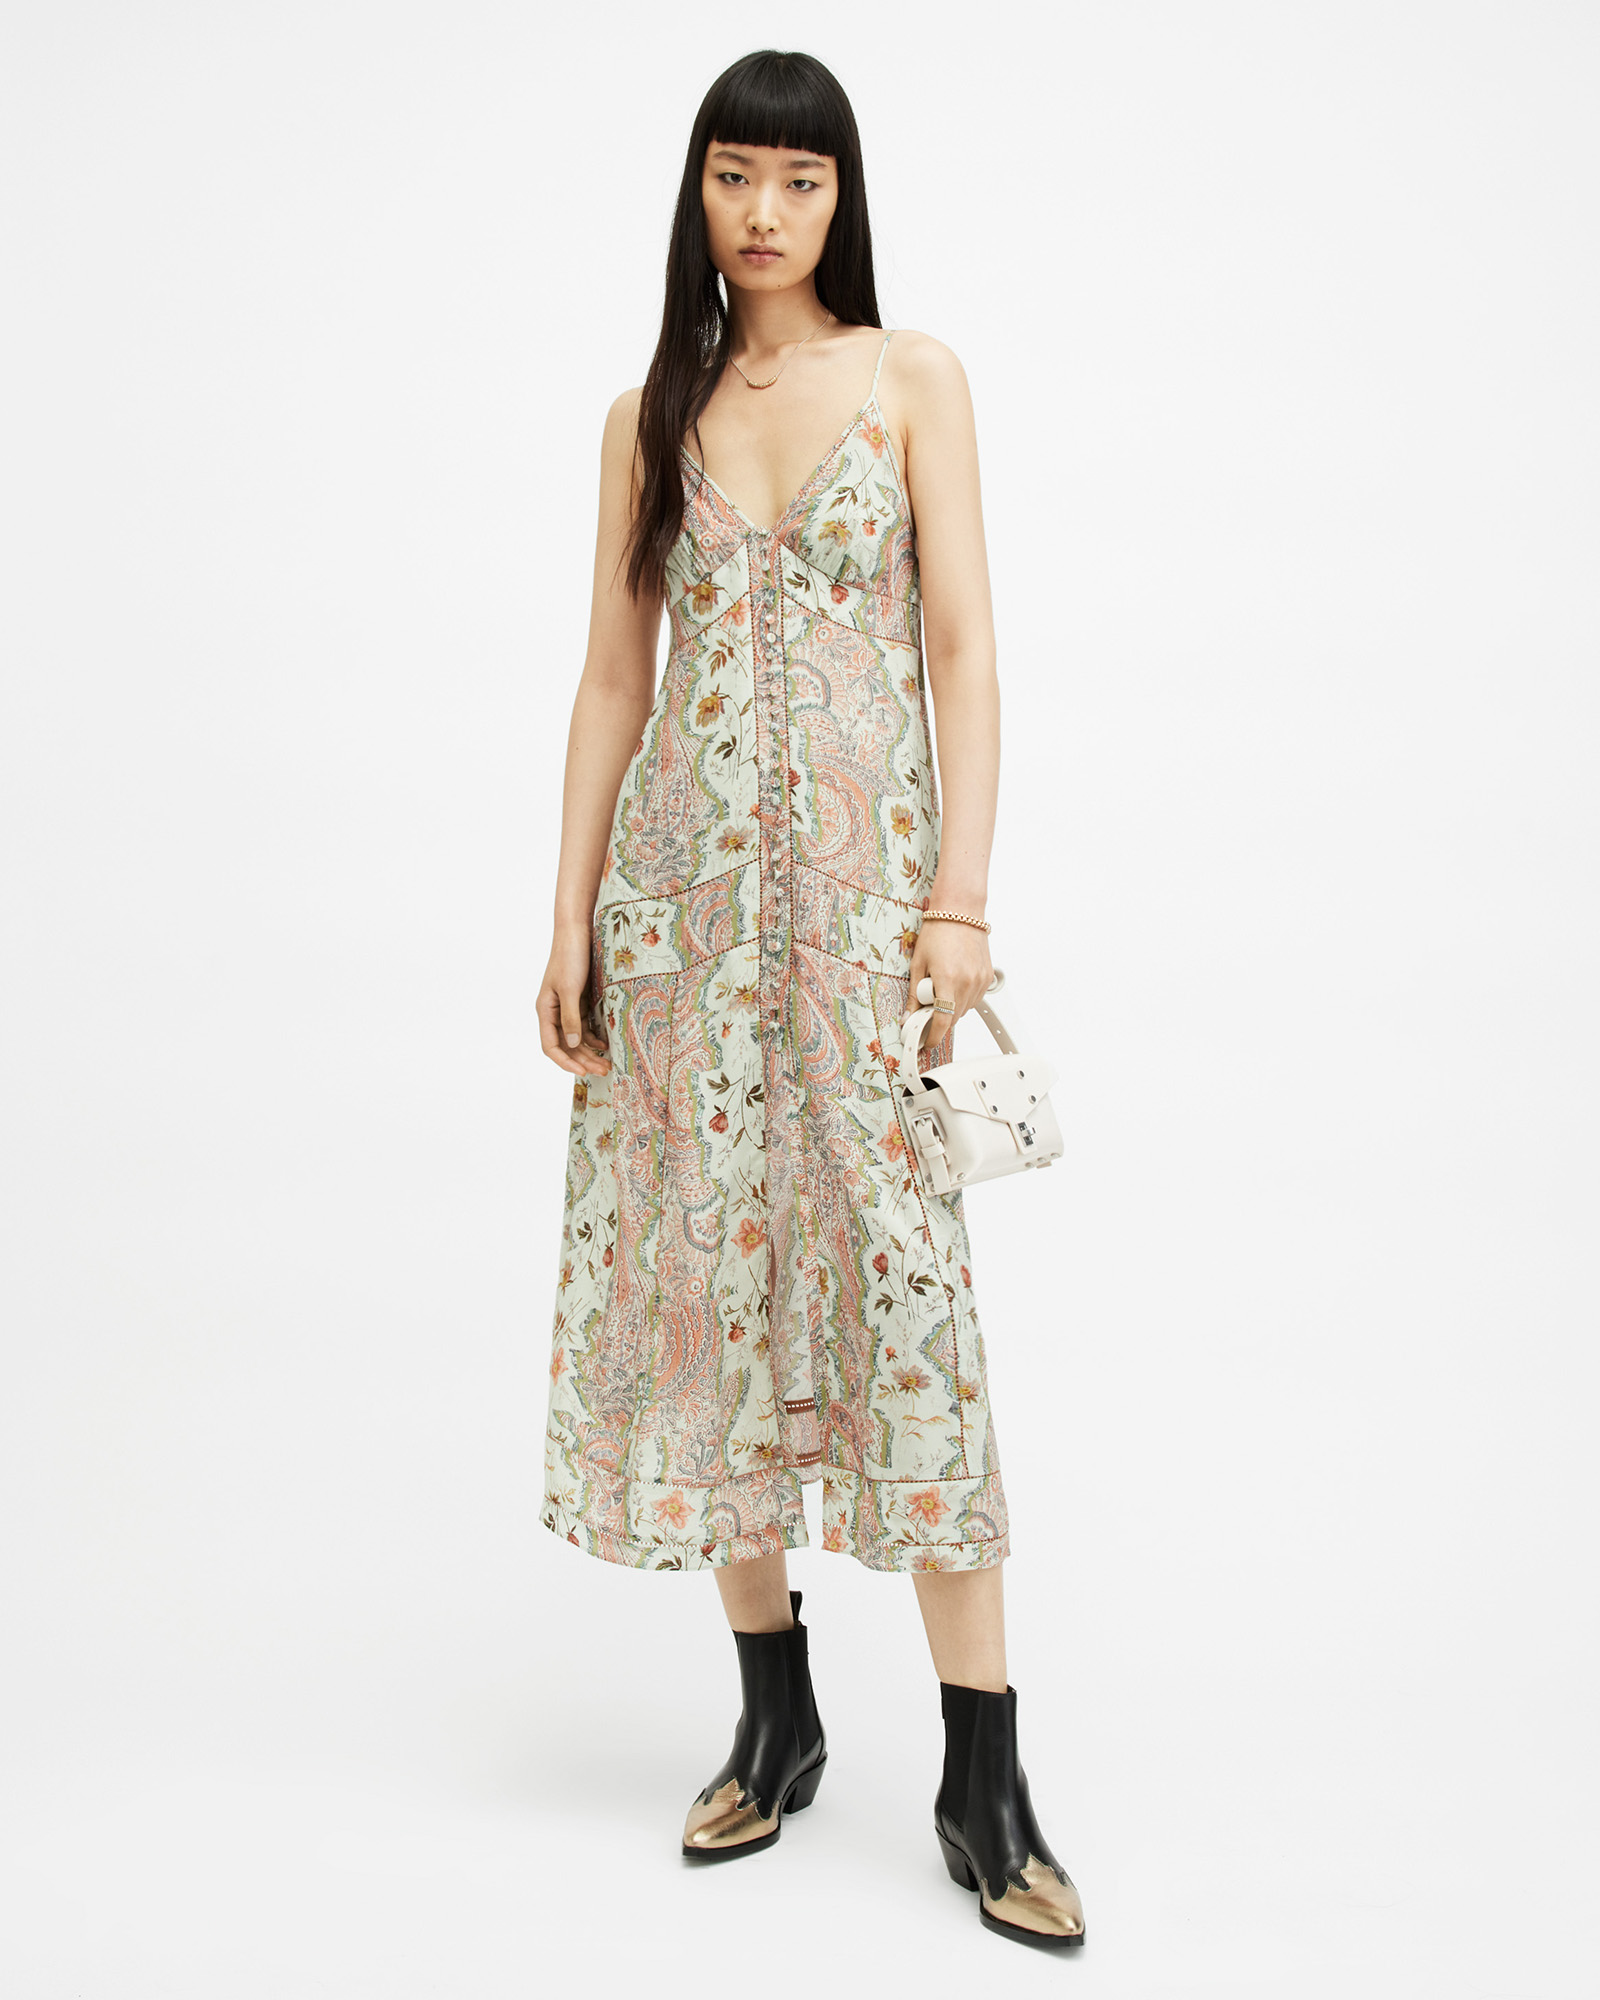 Paisley Scarf Print Maxi Dress in Sustainable Cotton Multi